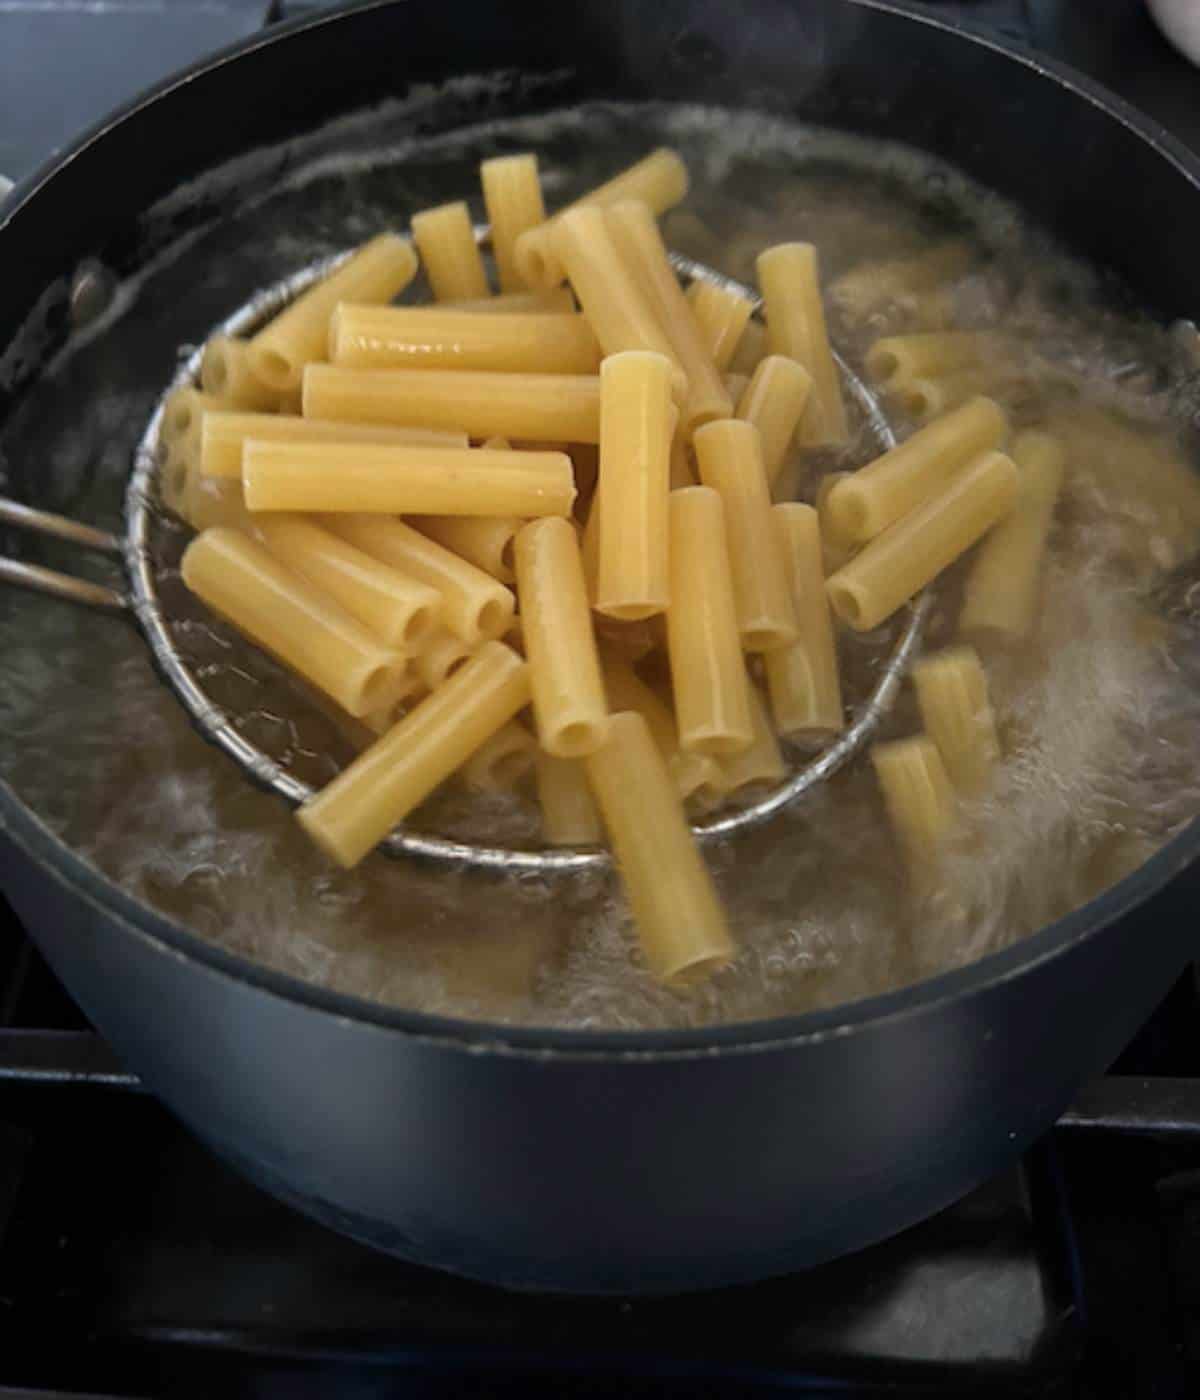 Ziti cooking in boiling water.